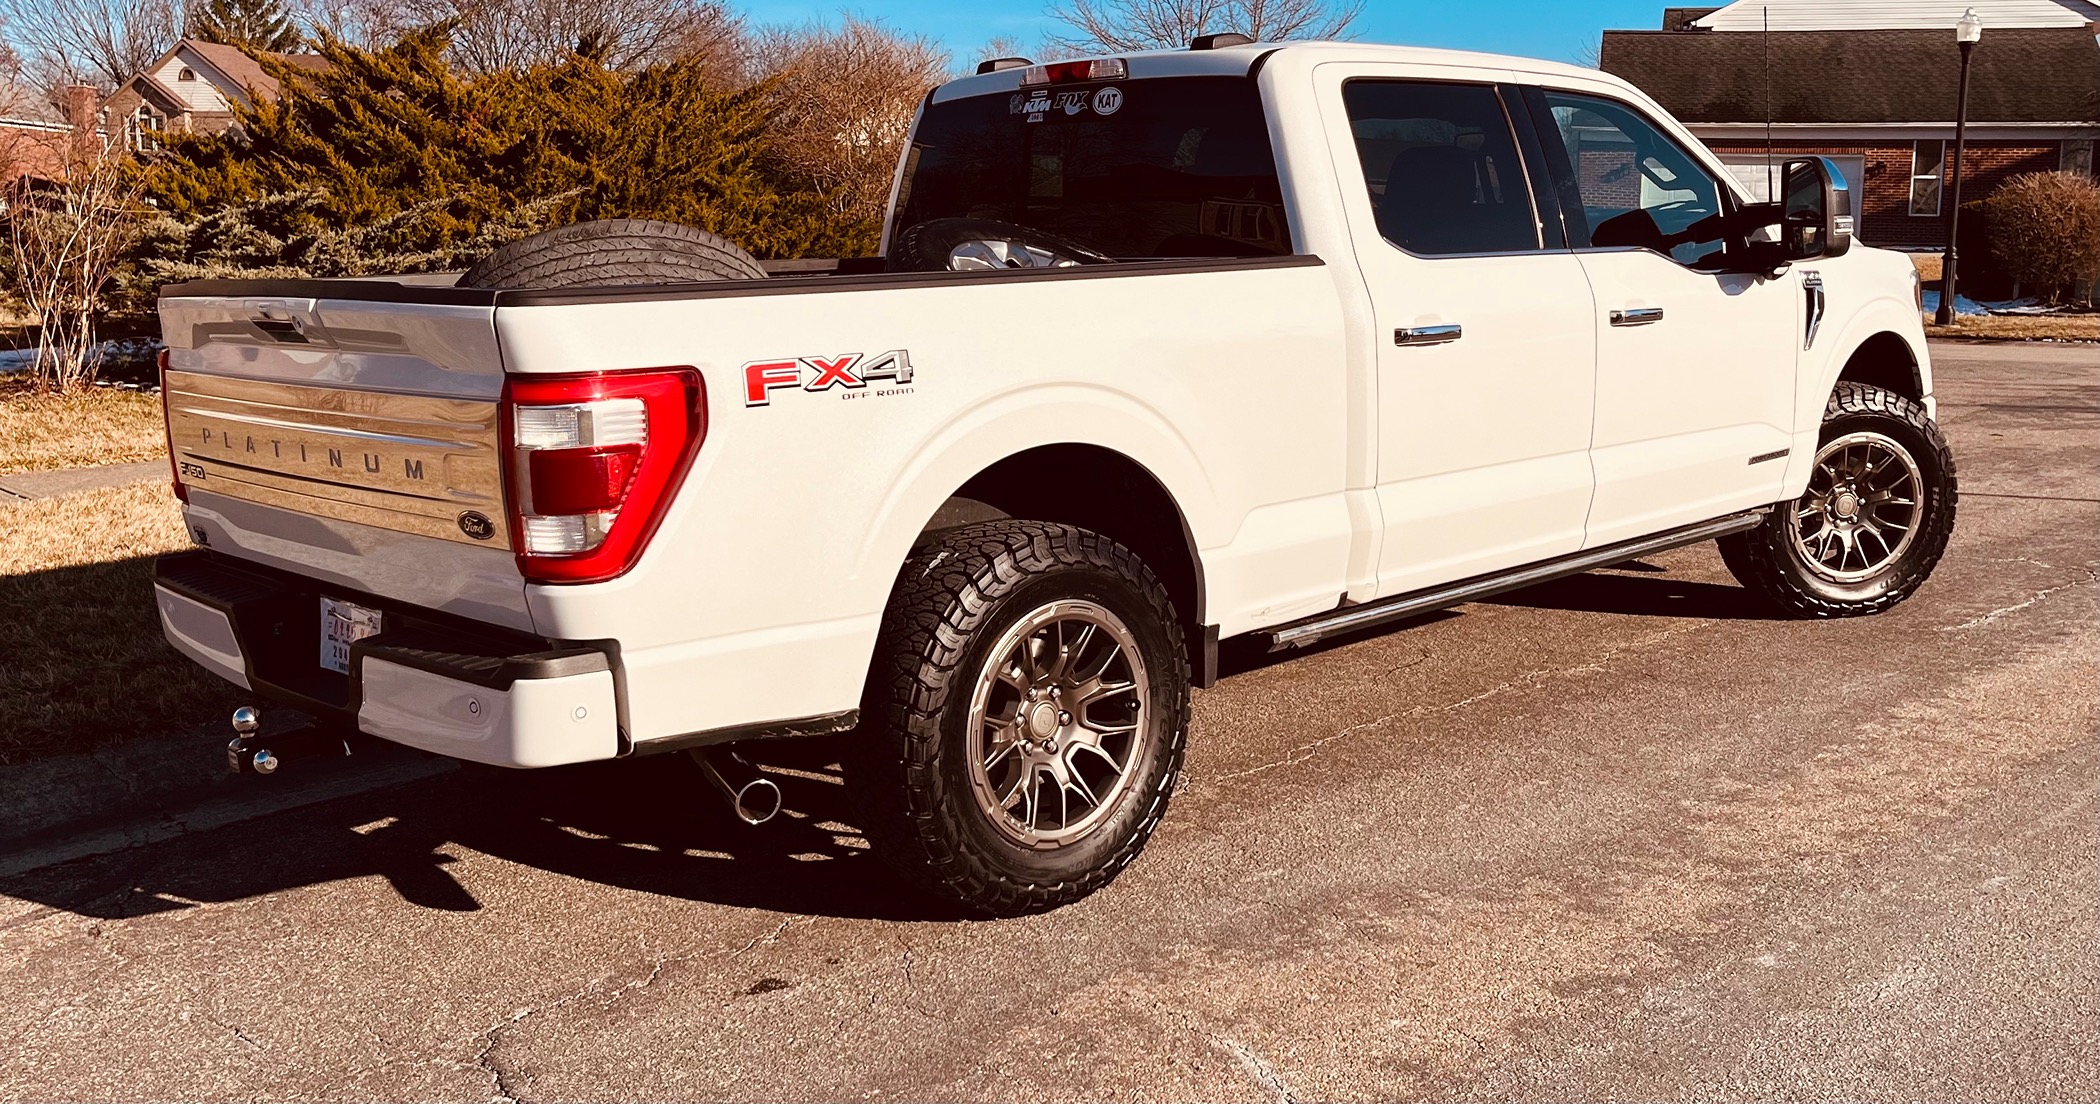 Ford F-150 Leveled or Lifted "Long Bed" 157" Wheel Base Photo Thread IMG_5768